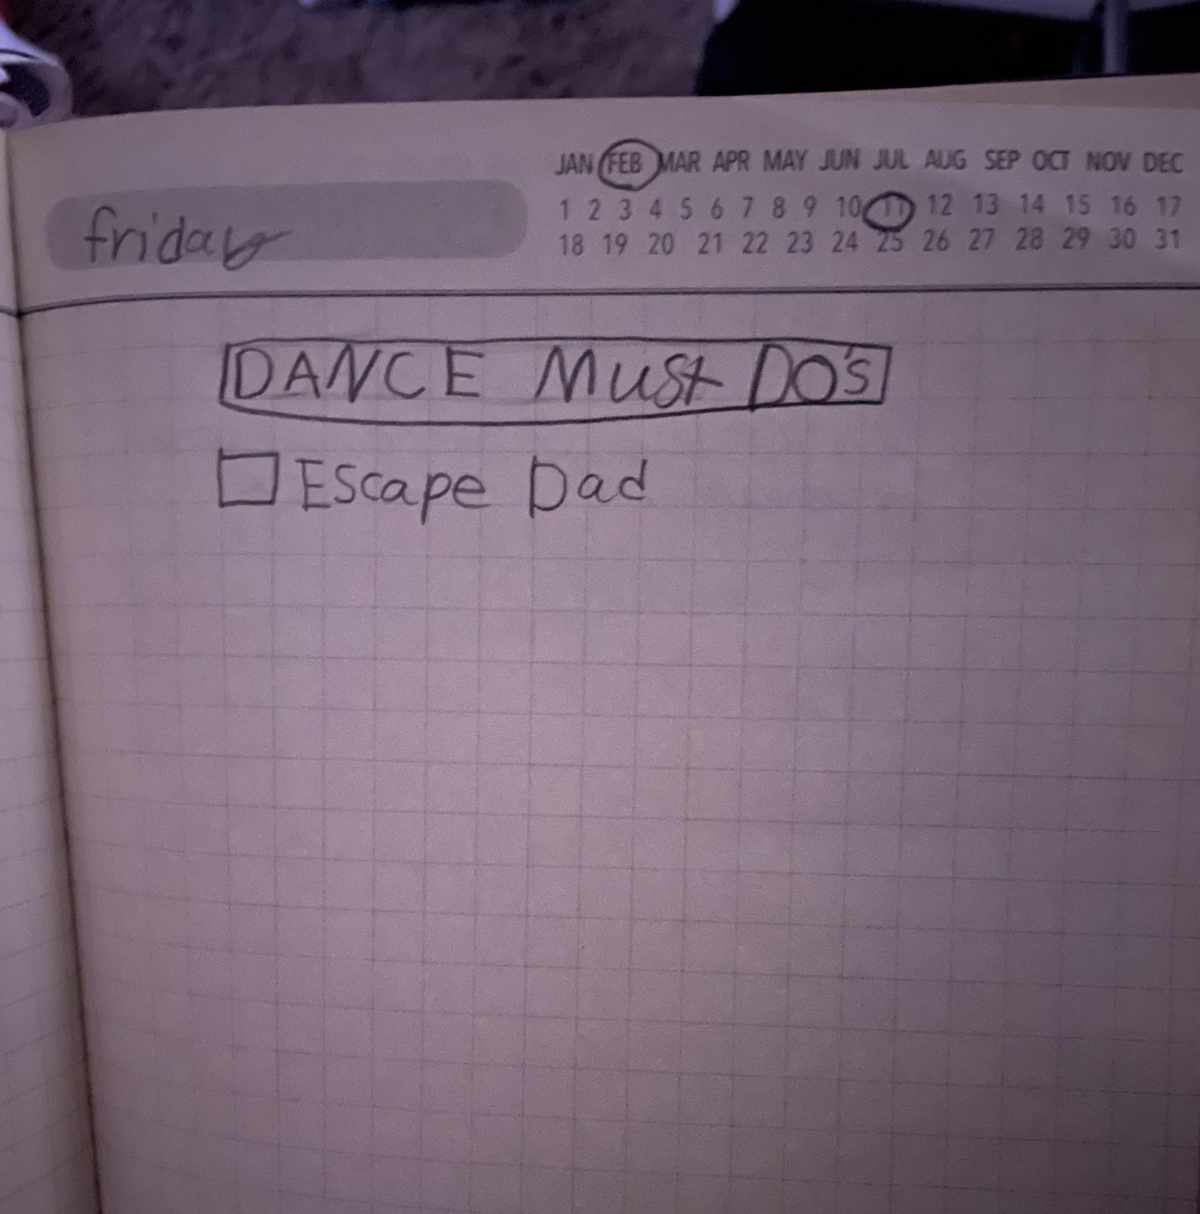 Earlier this year I chaperoned for my daughter’s (13) school dance. Yesterday my wife found this checklist in one of the many random notebooks laying around our house..